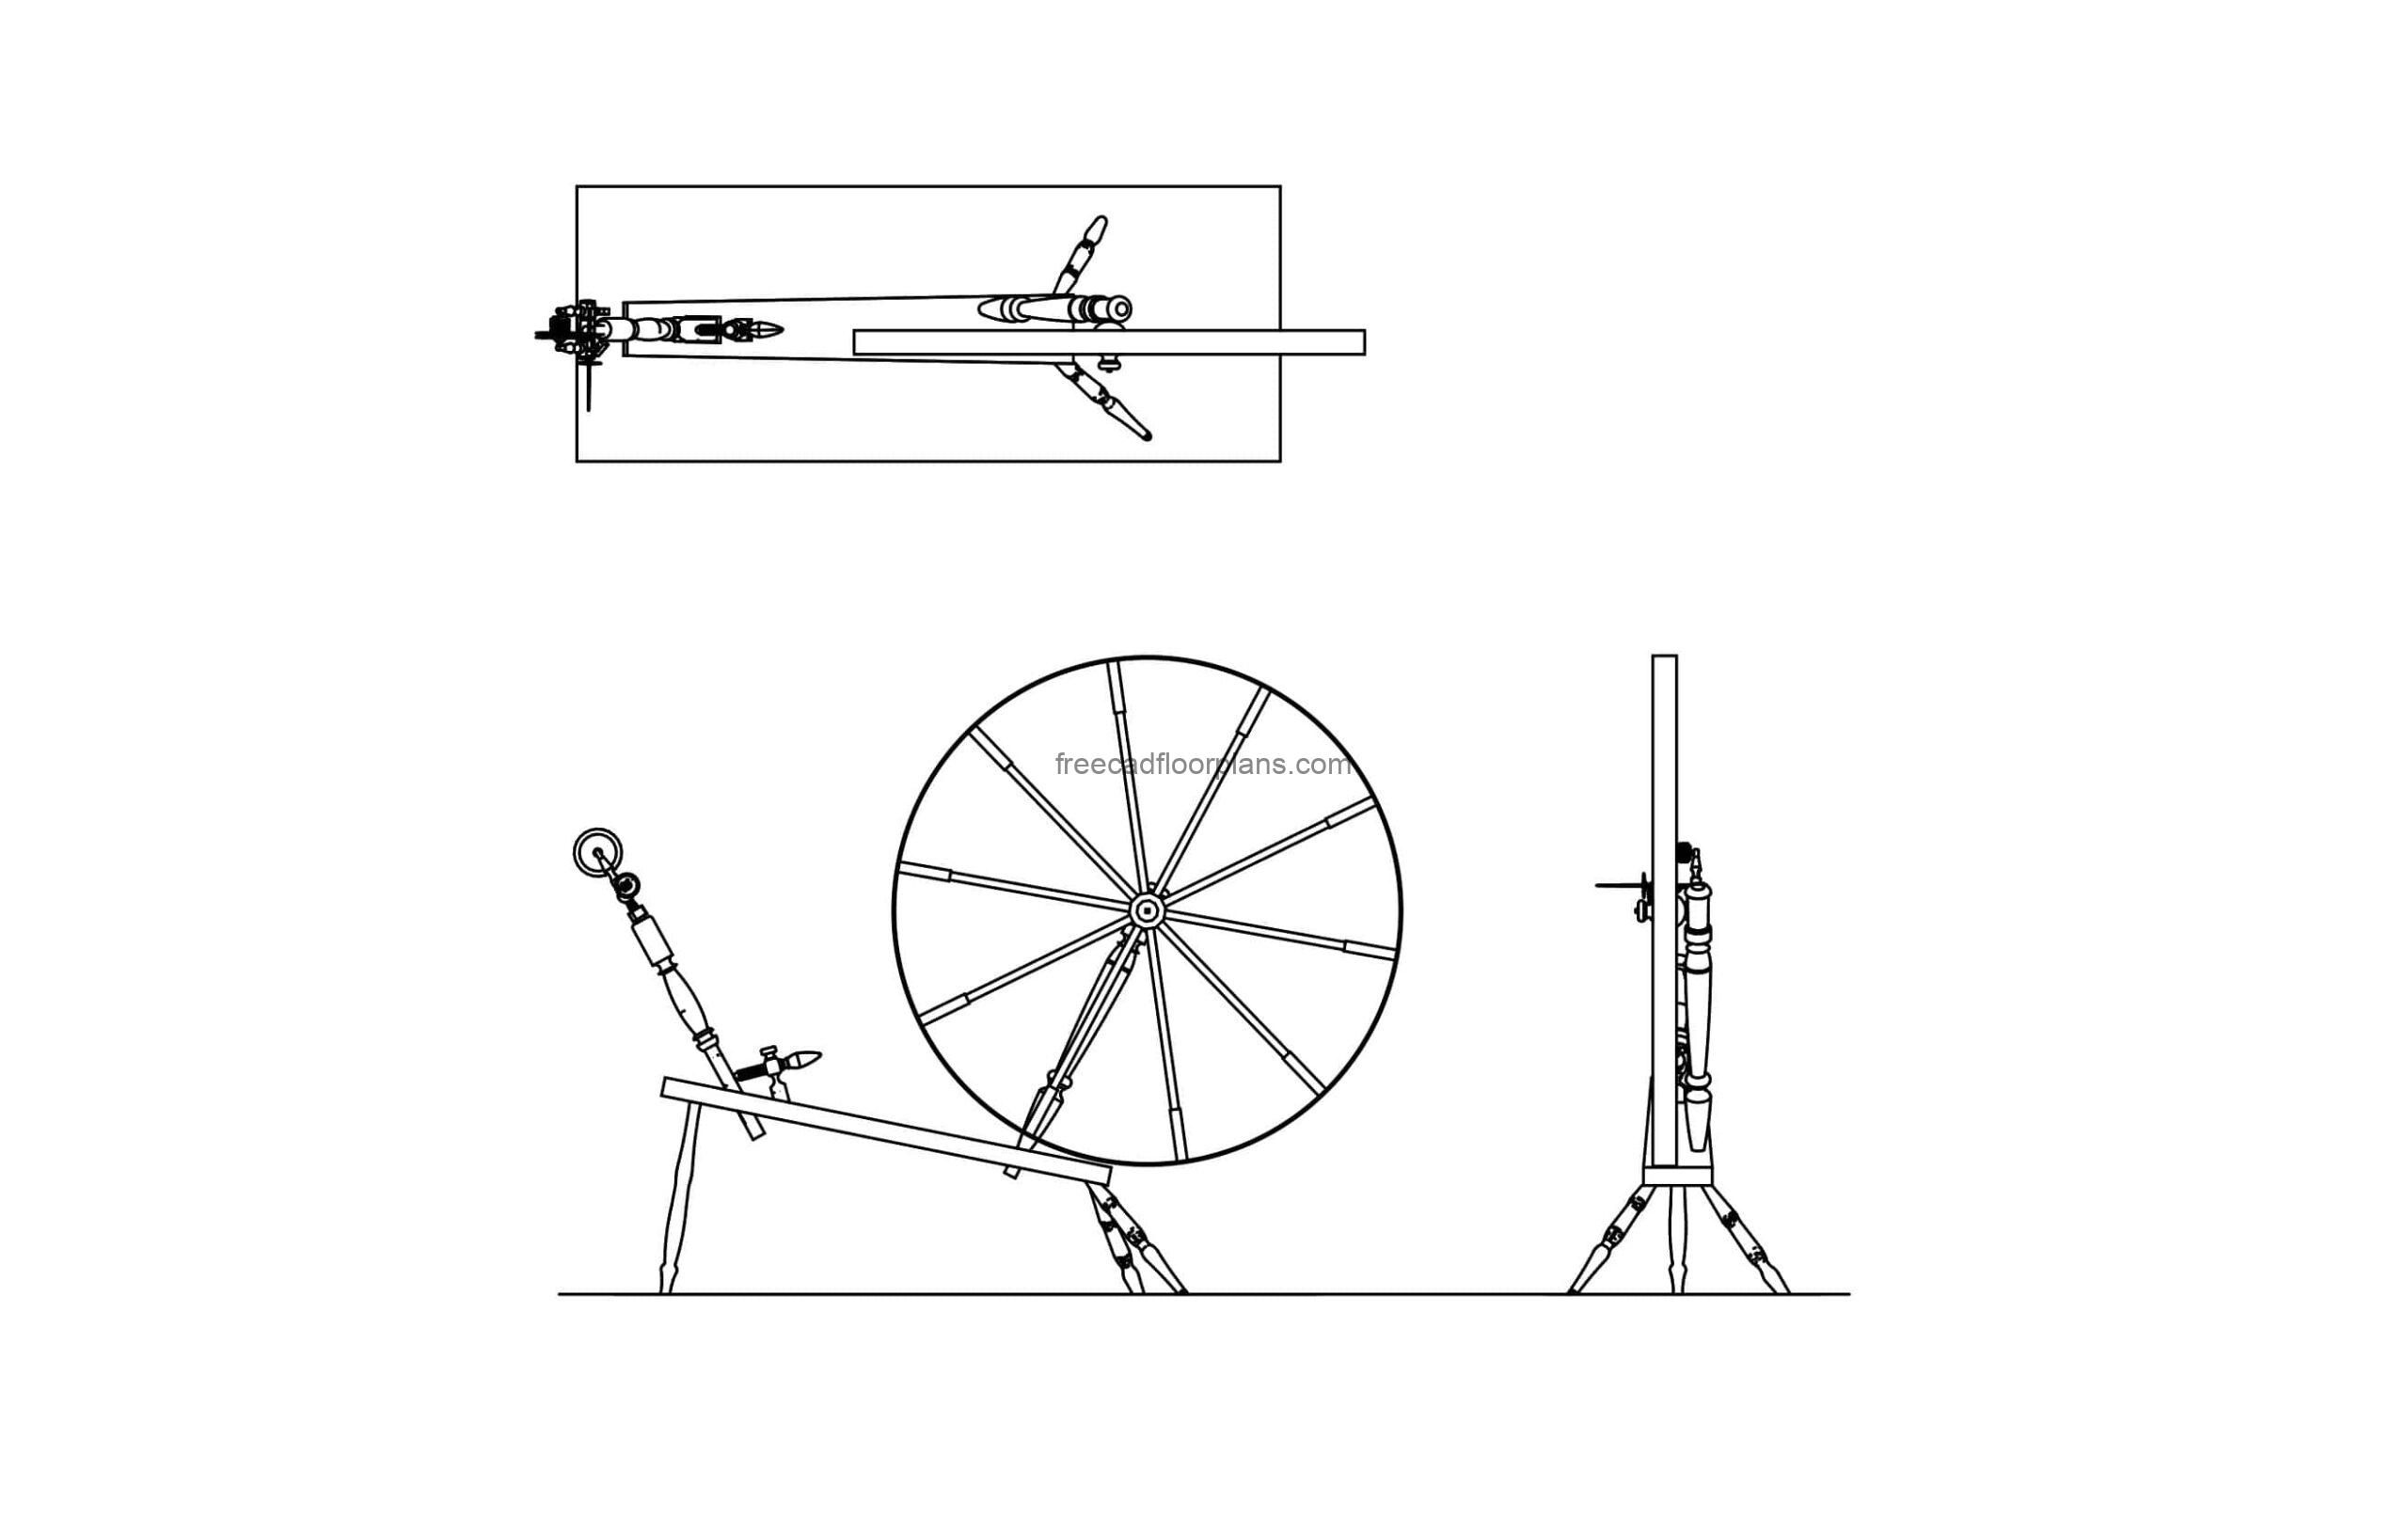 spinning wheel cad block autocad drawing 2d views plan, front and side elevations dwg file for free download